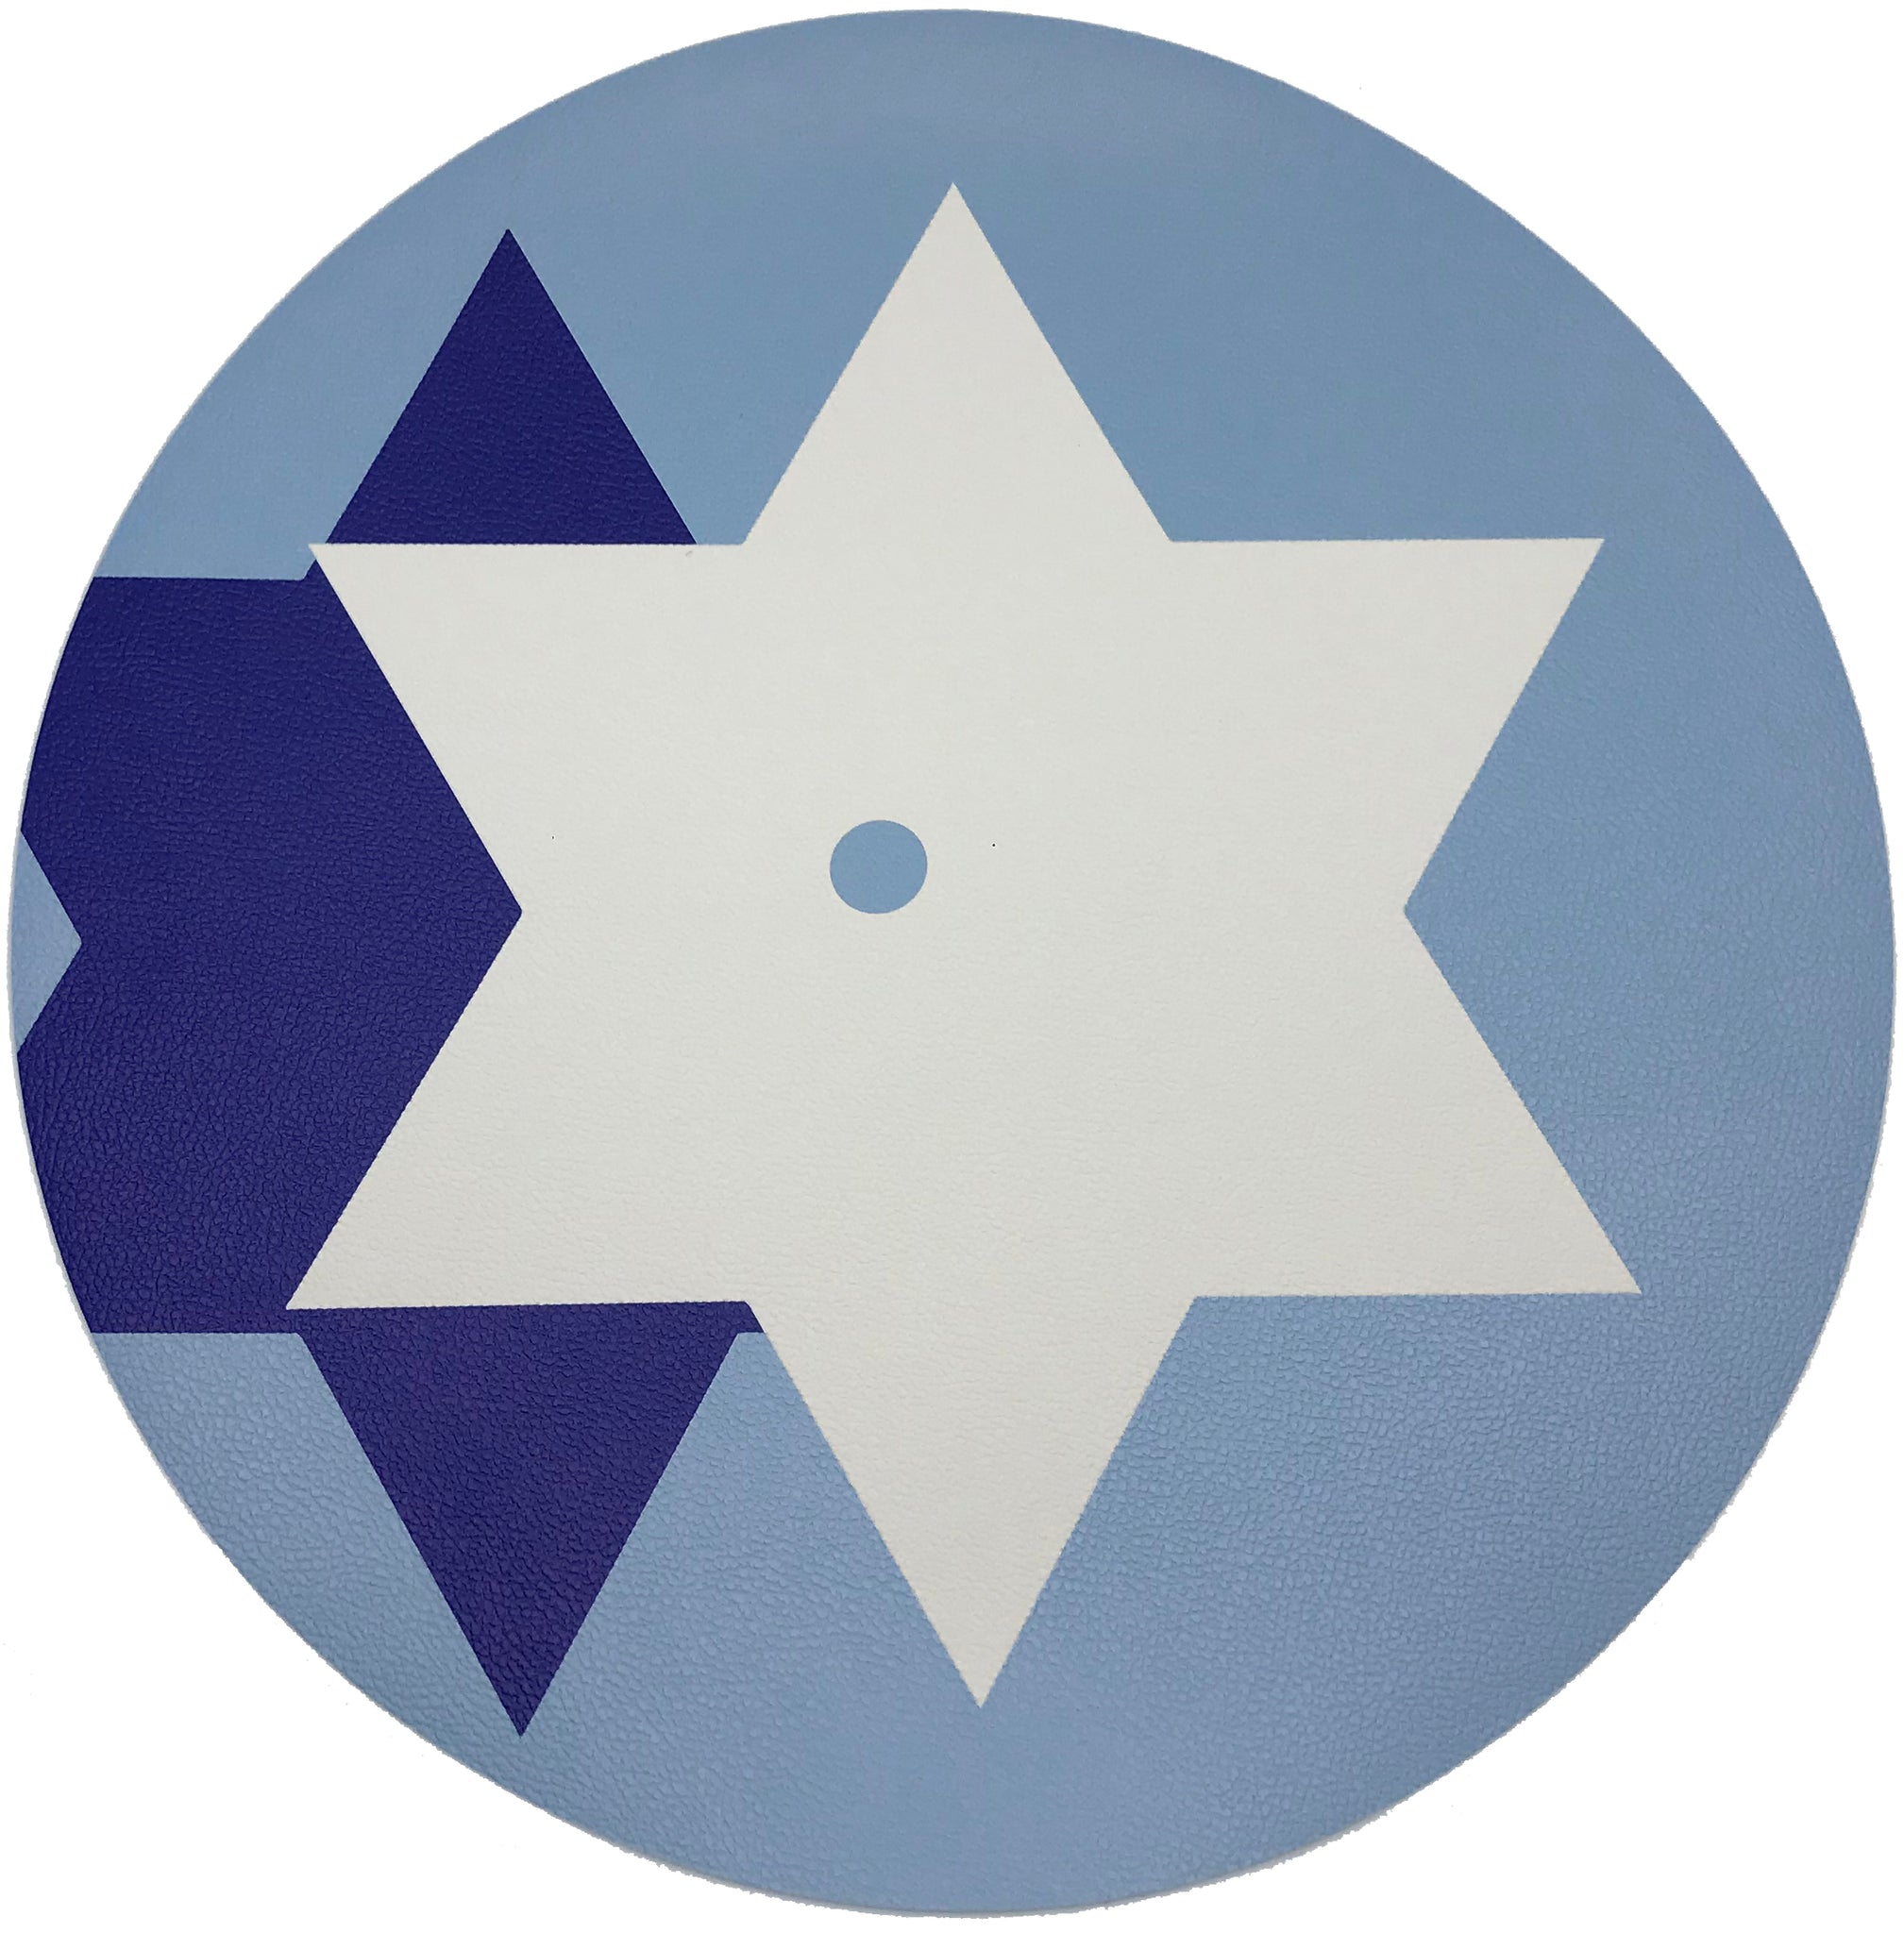 Star Of David 16" Round Pebble Placemats, Set Of 4 - nicolettemayer.com